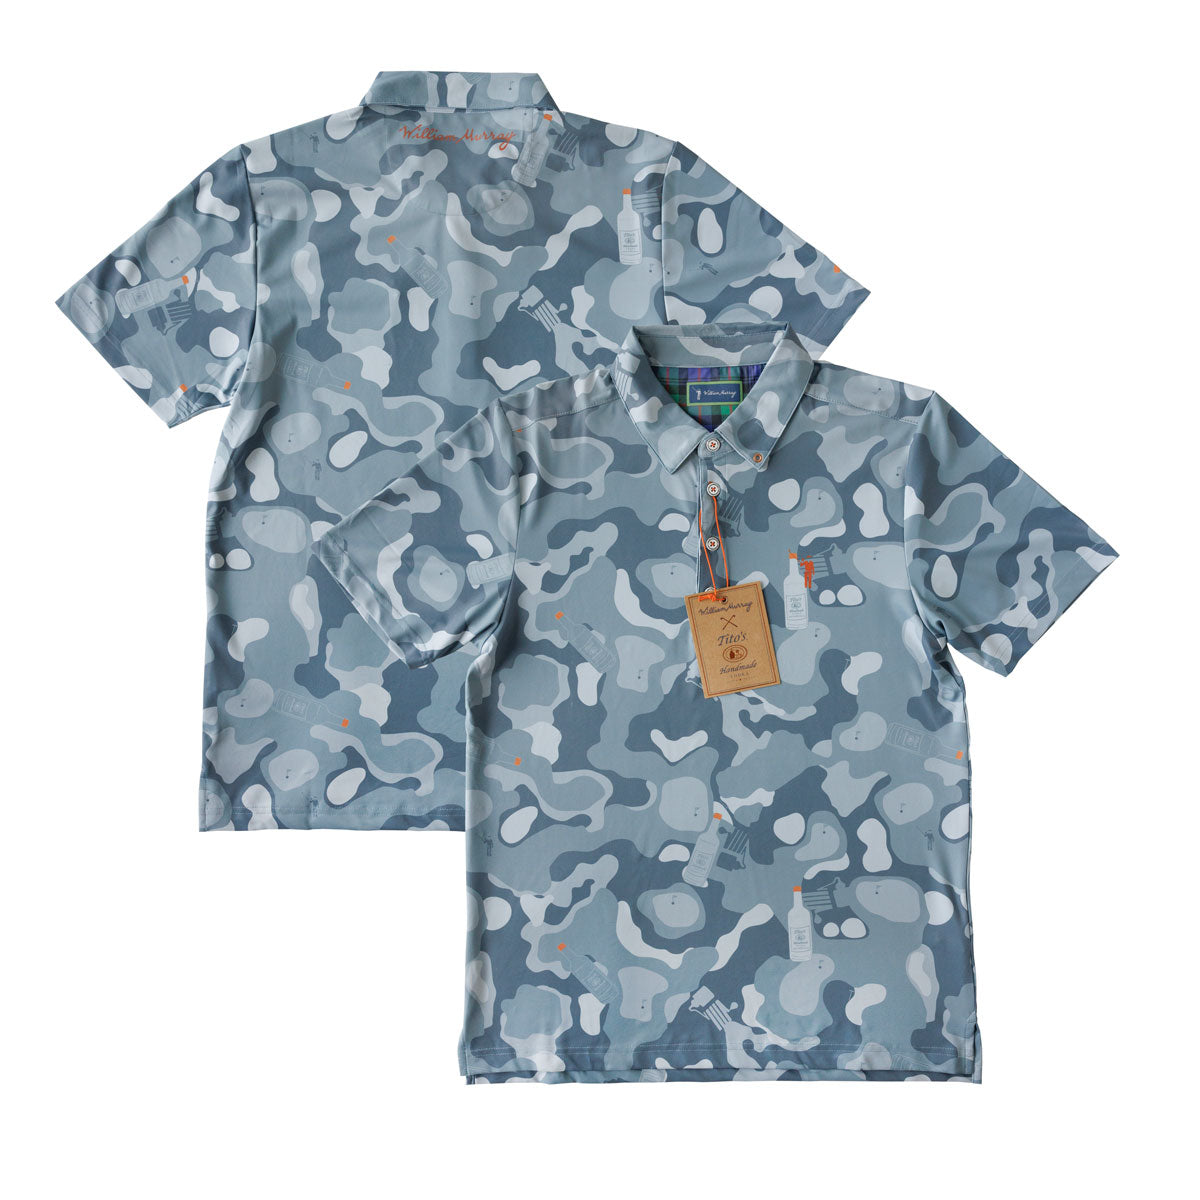 Blue camouflage polo with Tito's Handmade Vodka bottle and pot still designs, William Murray logo on front, and William Murray wordmark on back